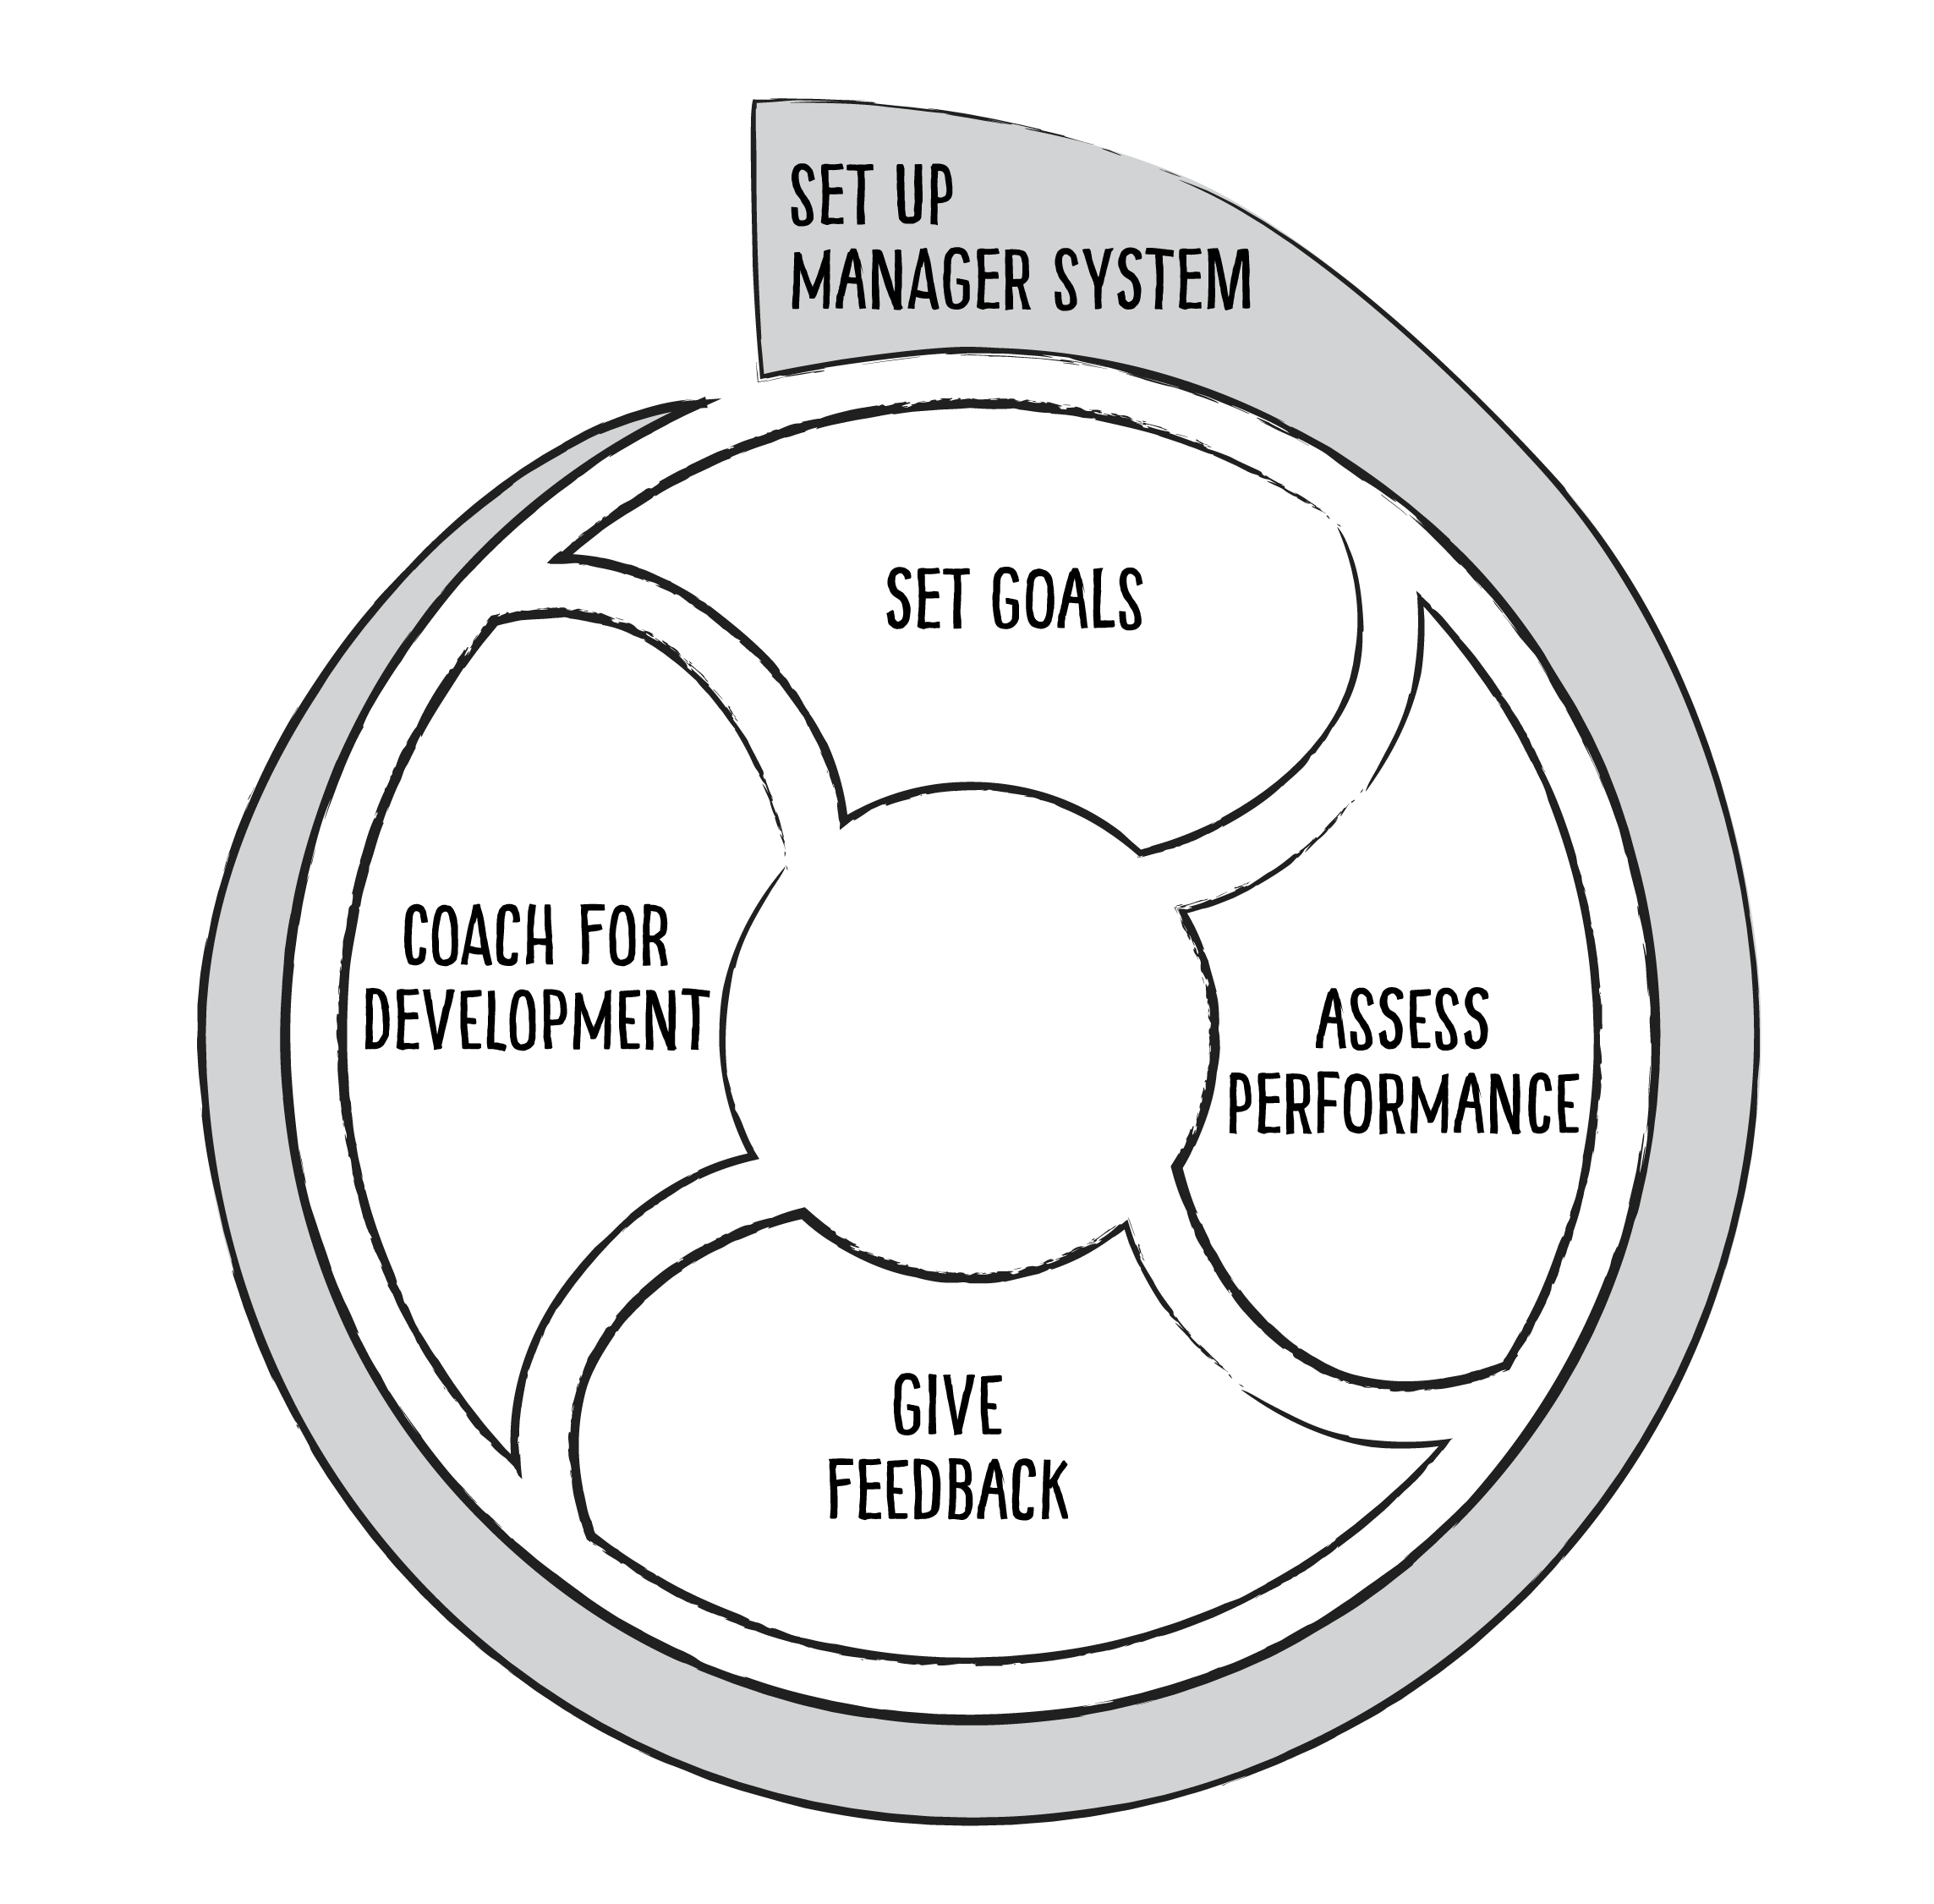 PEOPLE SYSTEMS FOR CATALYZING PERFORMANCE